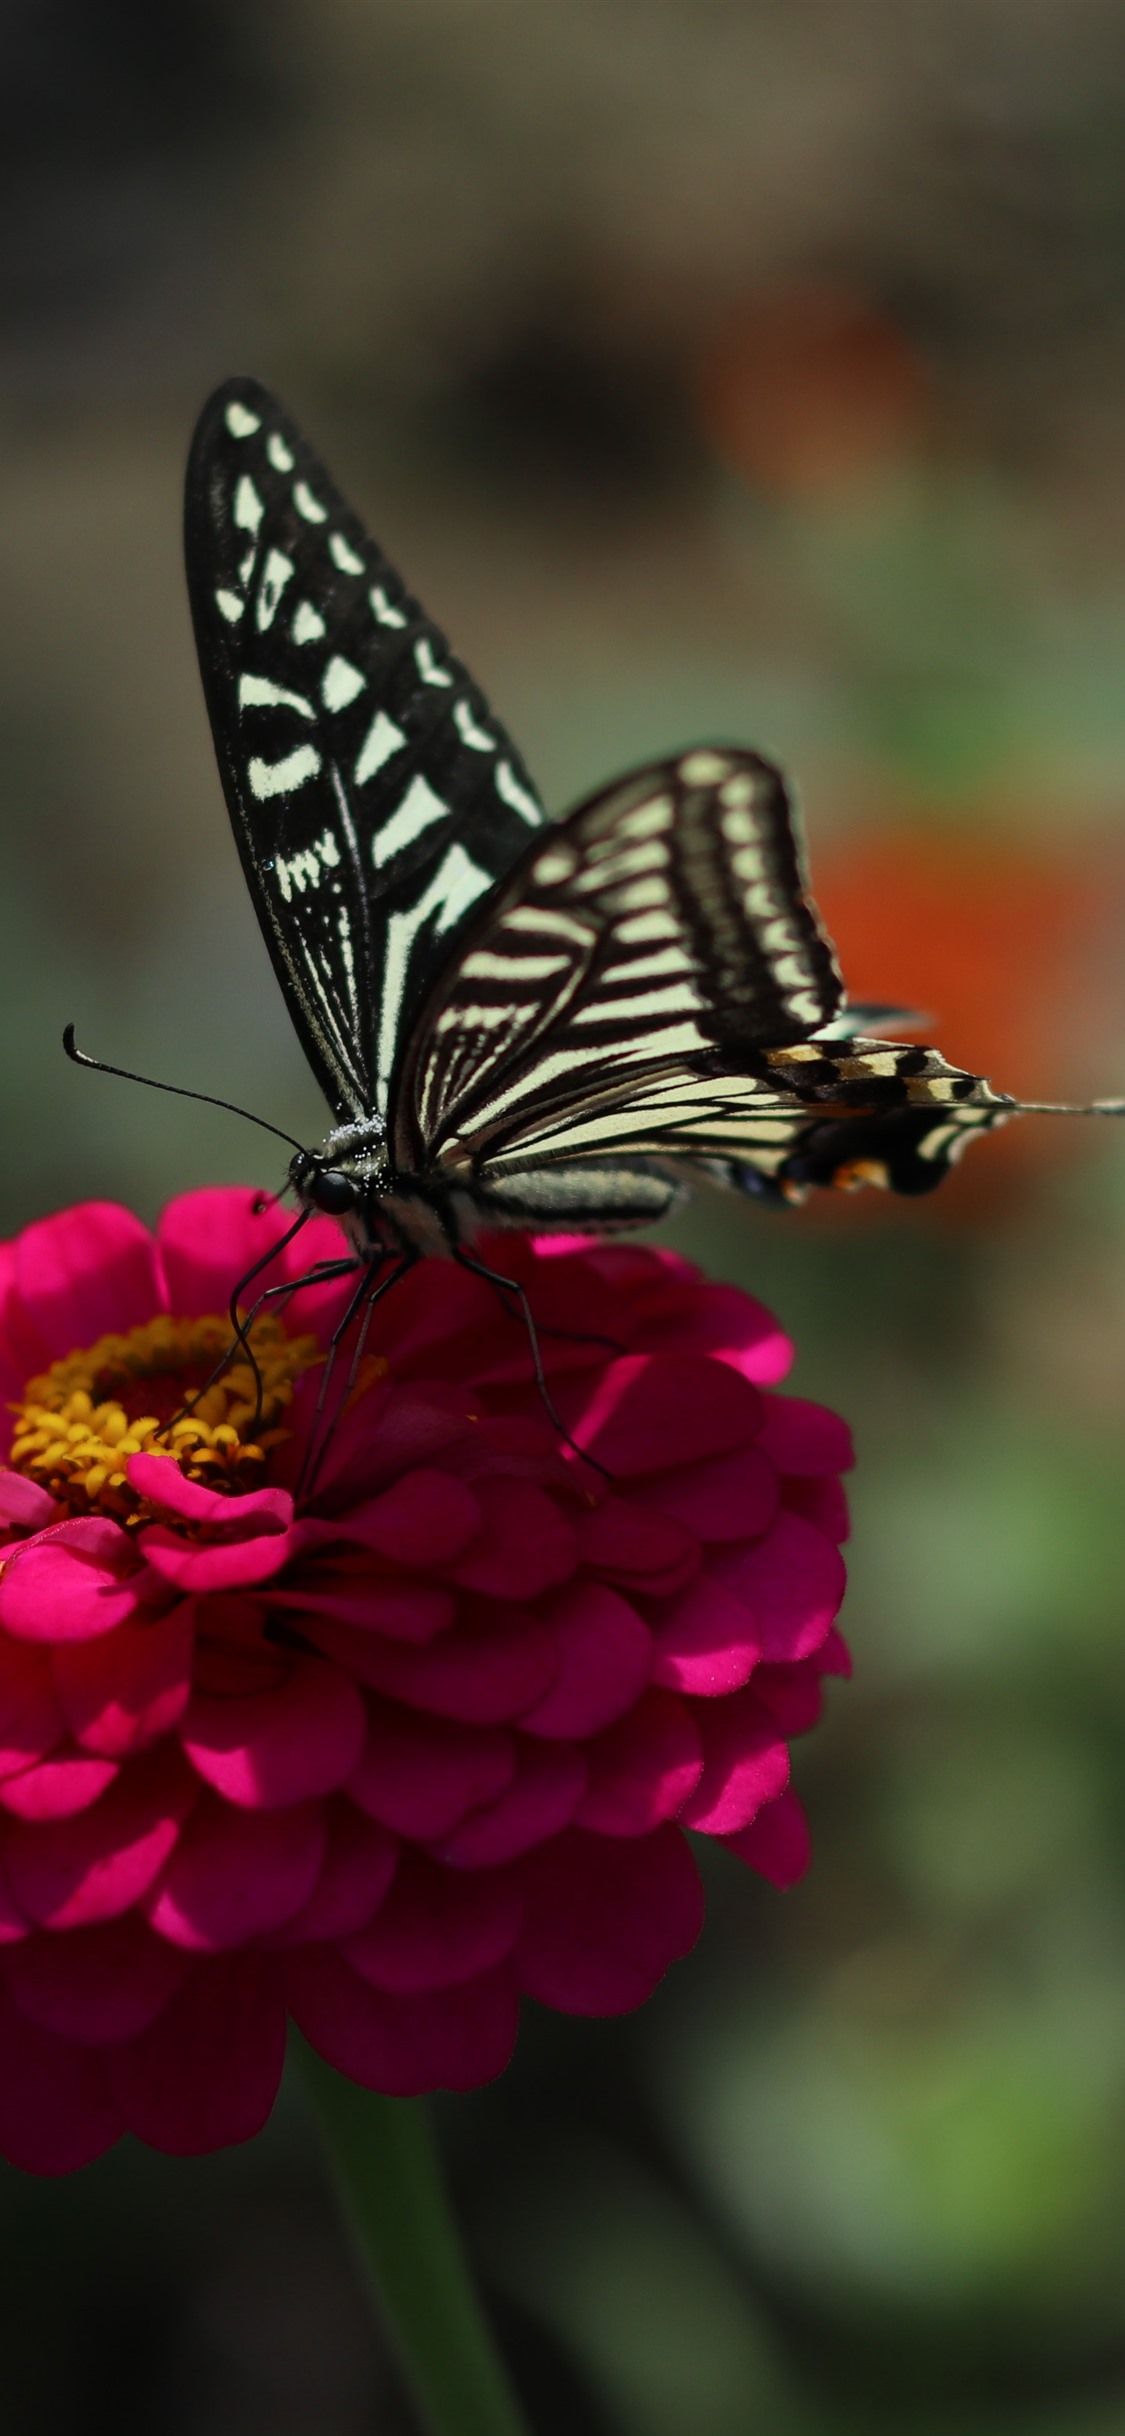 Pink Flower, Black Butterfly, Spring 1125x2436 IPhone 11 Pro XS X Wallpaper, Background, Picture, Image